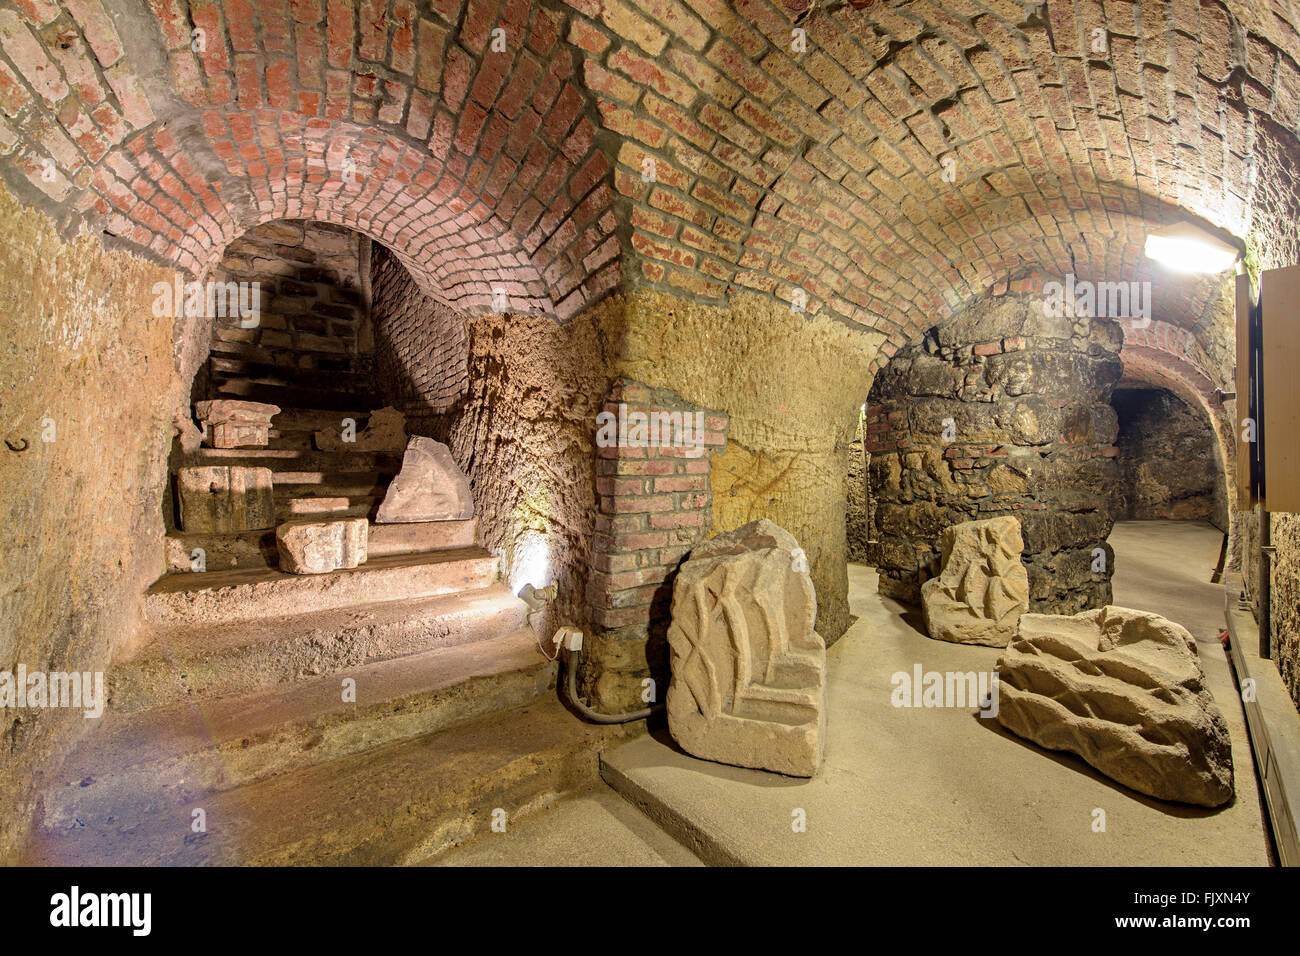 Pilsen medieval network of vaulted subterranean tunnels Stock Photo